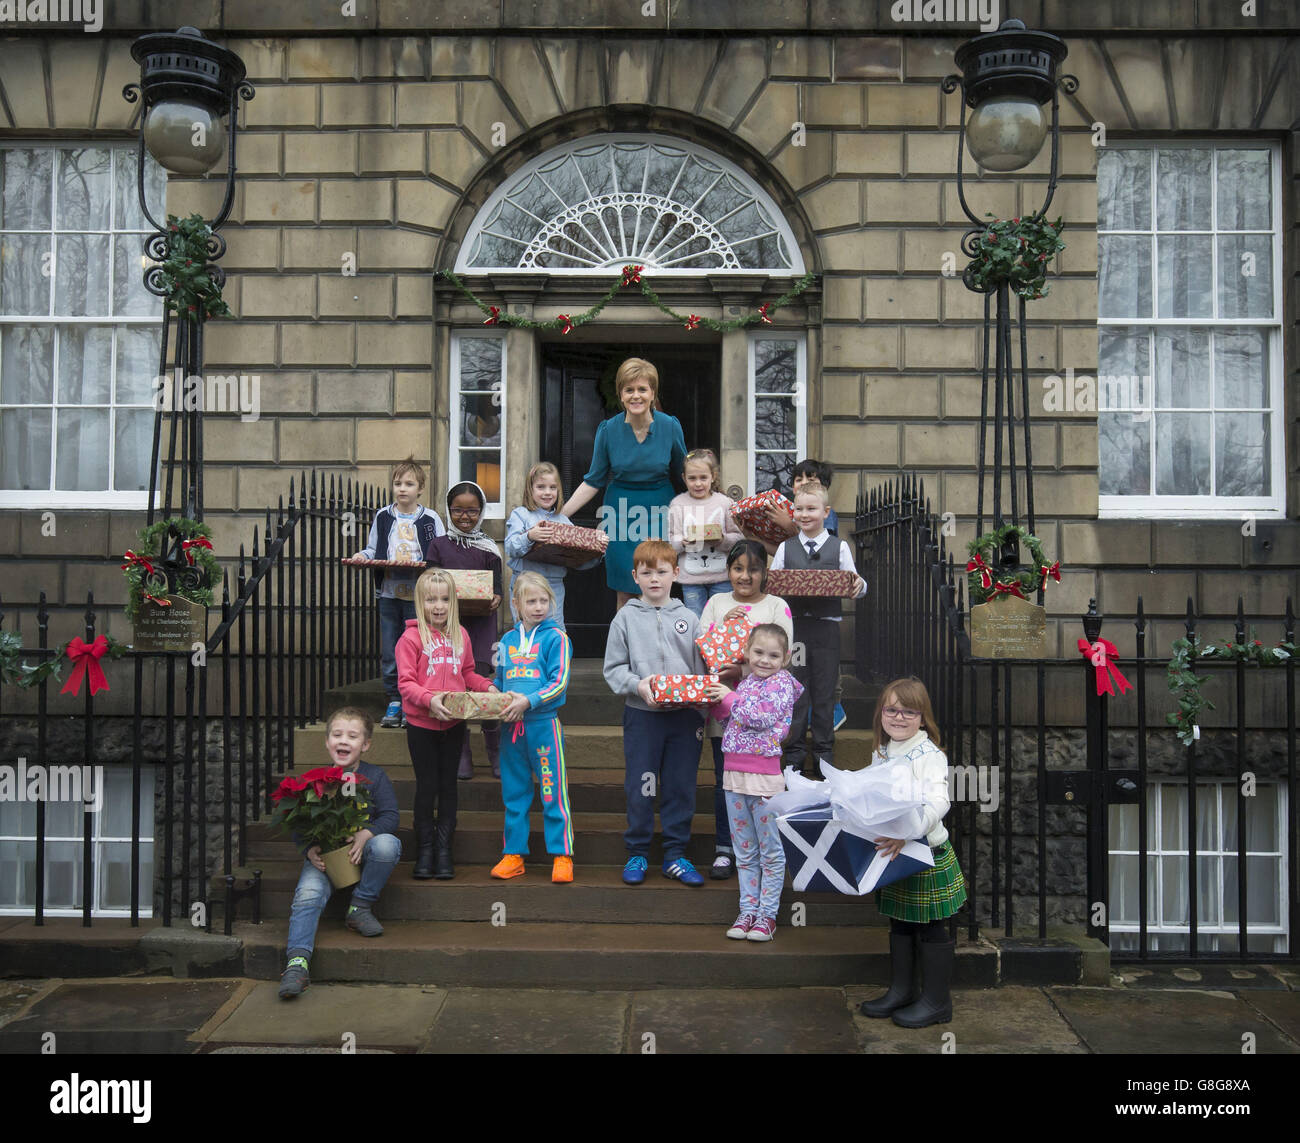 Scottish First Minister Nicola Sturgeon with schoolchildren from Forthview Primary School in Pilton as she unveils her 2015 Christmas card at her official residence in Edinburgh, Bute House. A special festive illustration of Katie Morag by Mairi Hedderwick features on the front of the card. Stock Photo